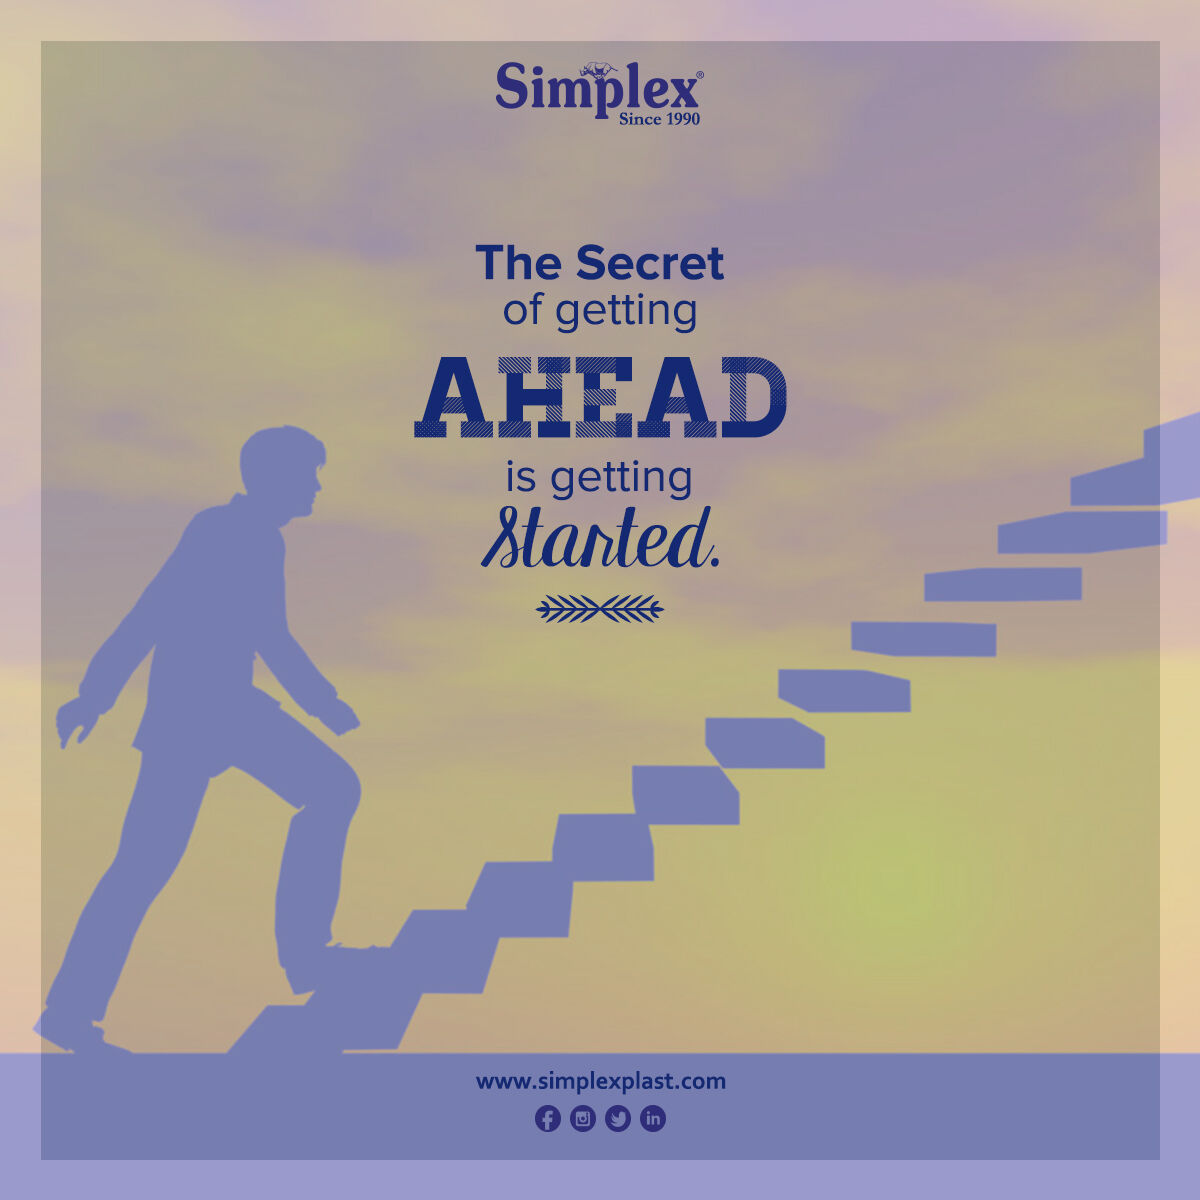 The secret of getting started is breaking all of your complex, overwhelming tasks into small, manageable tasks, and then starting with the first one.

#SimplexPlast #Secret #MondayMotivation #StayAhead #motivationalquotes #WaterTanks #WaterisLive #Vasai #Virar #Mumbai #Surat